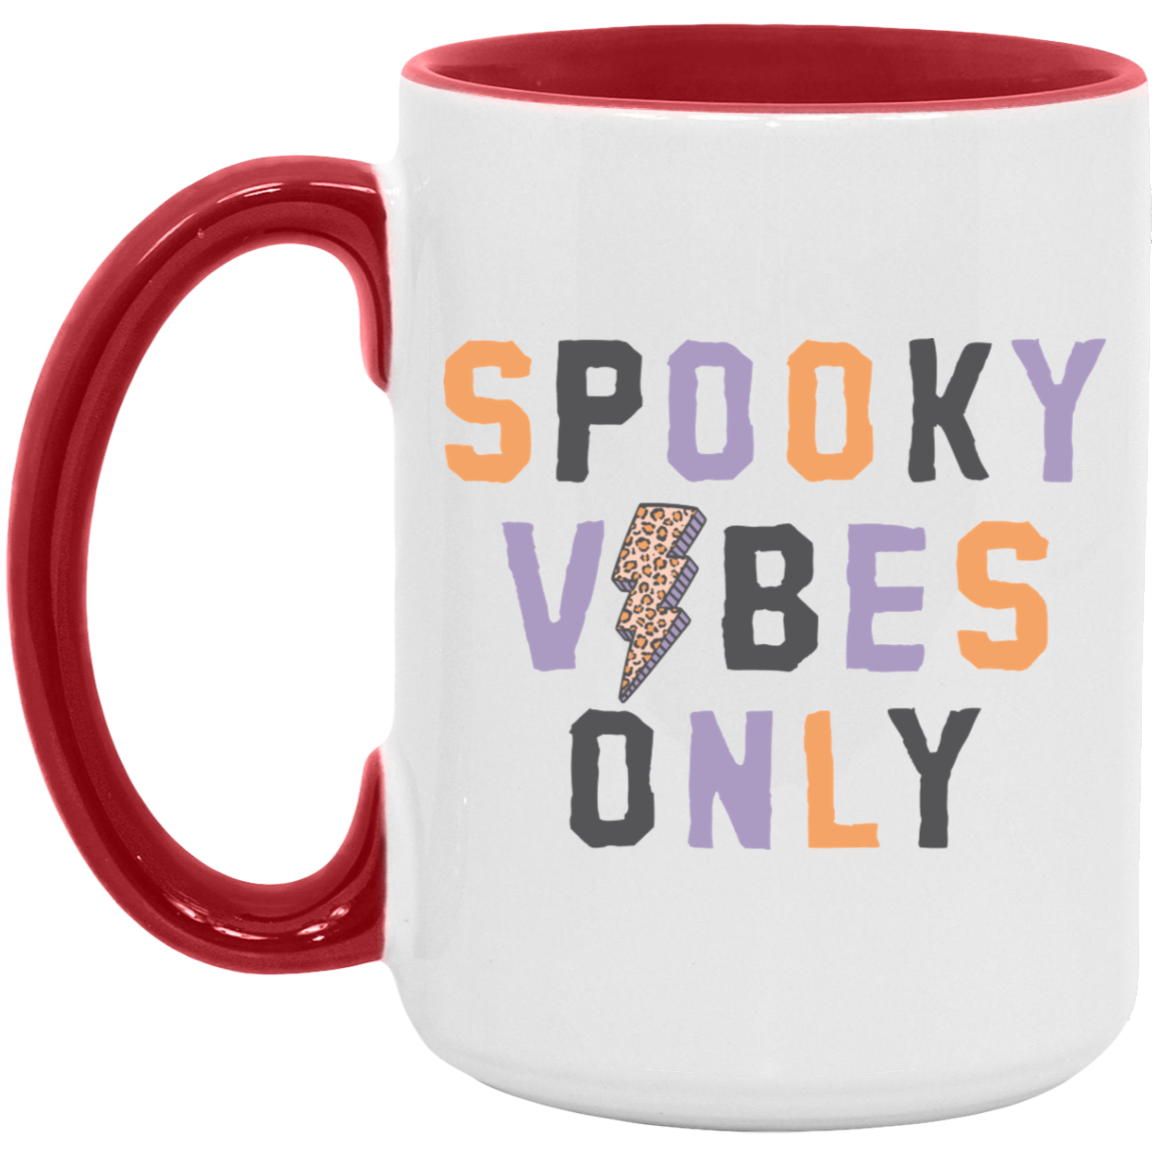 Spooky Vibes Only Mug